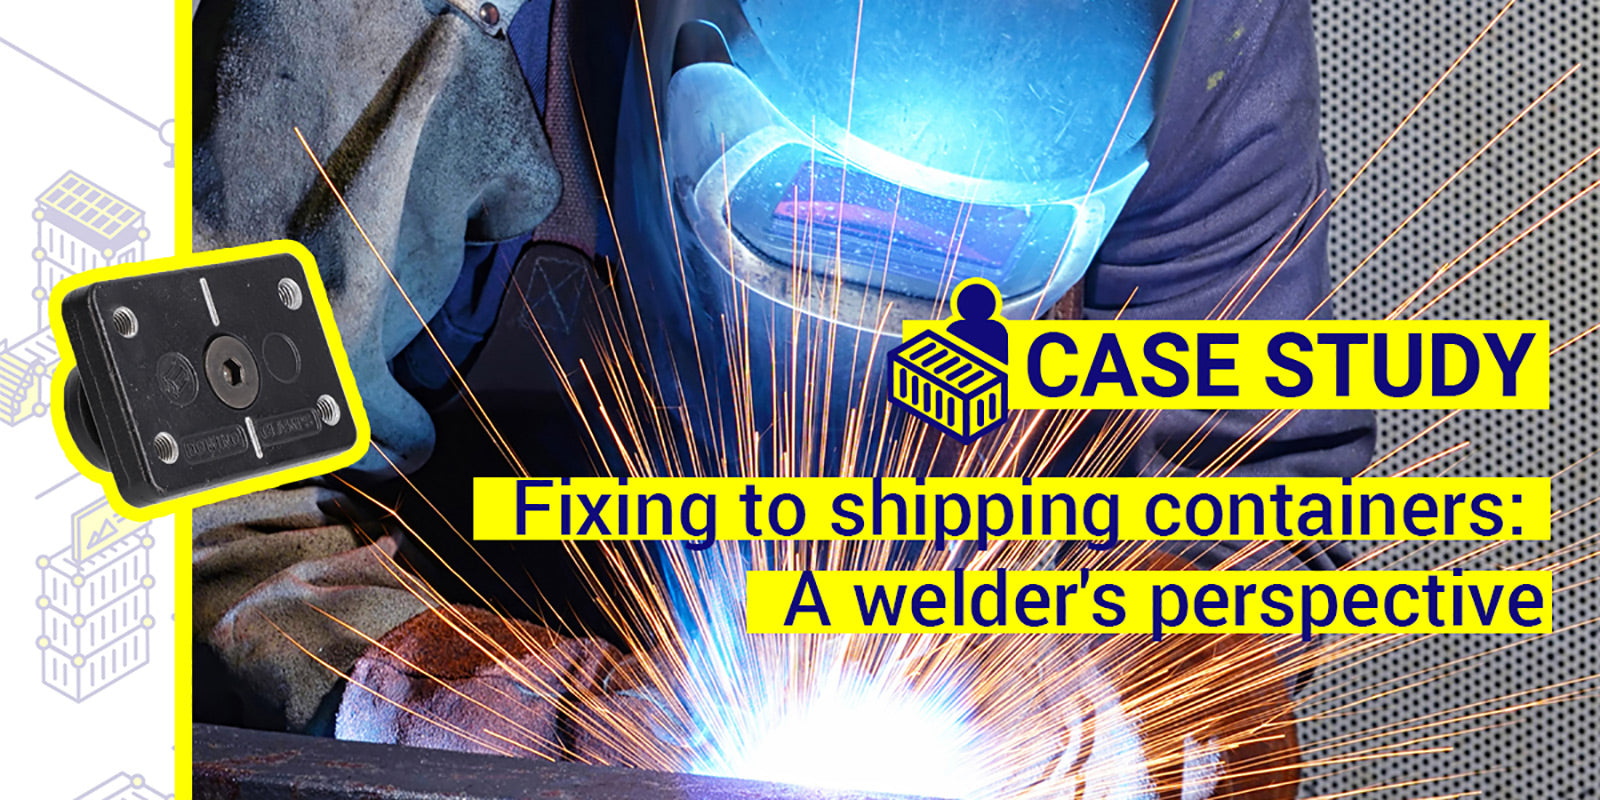 Fixing to a shipping container: A welder's perspective